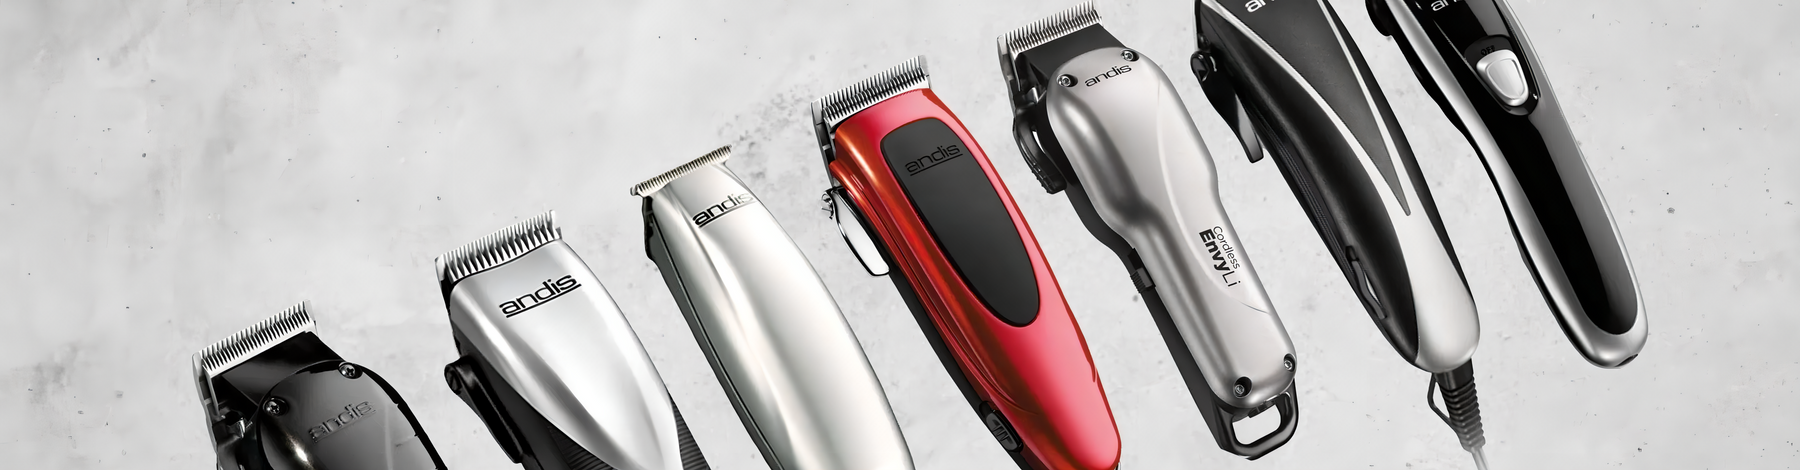 ON DEMAND BARBERS - ANDIS TRIMMERS 